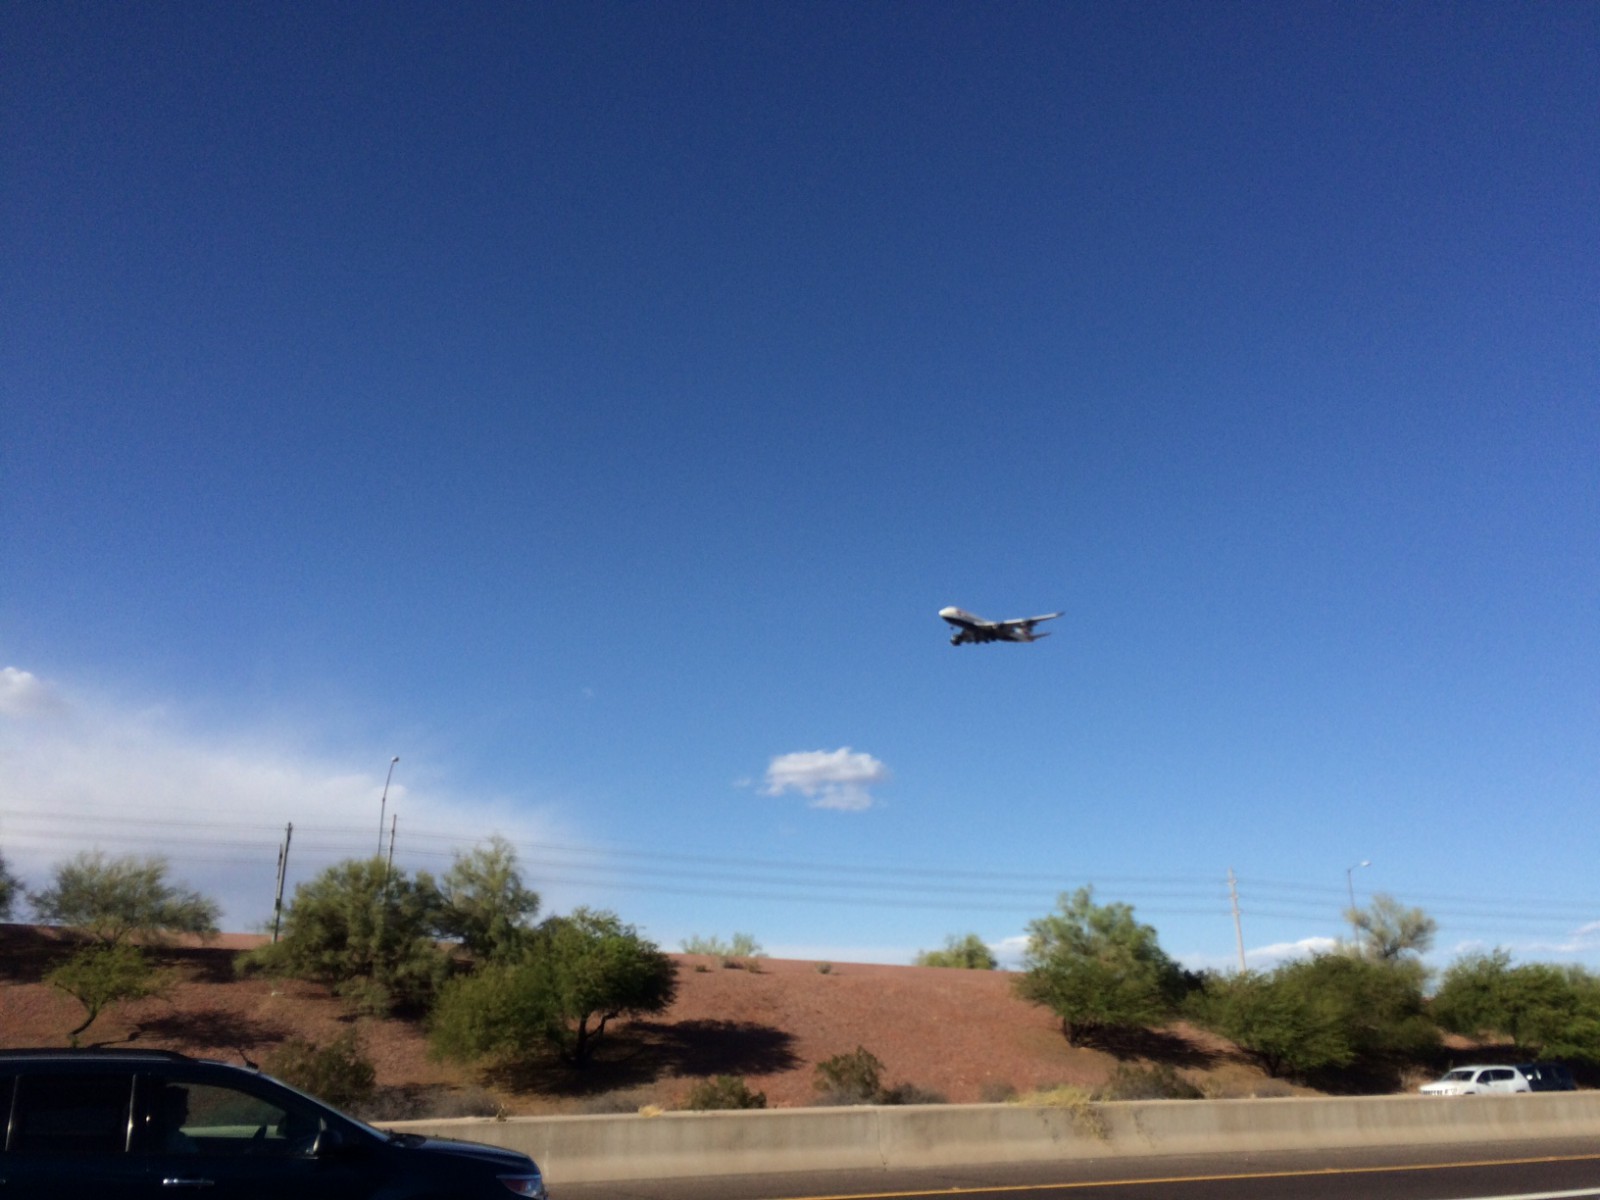 Very low British Airways 747 coming in over Tempe Town Lake.